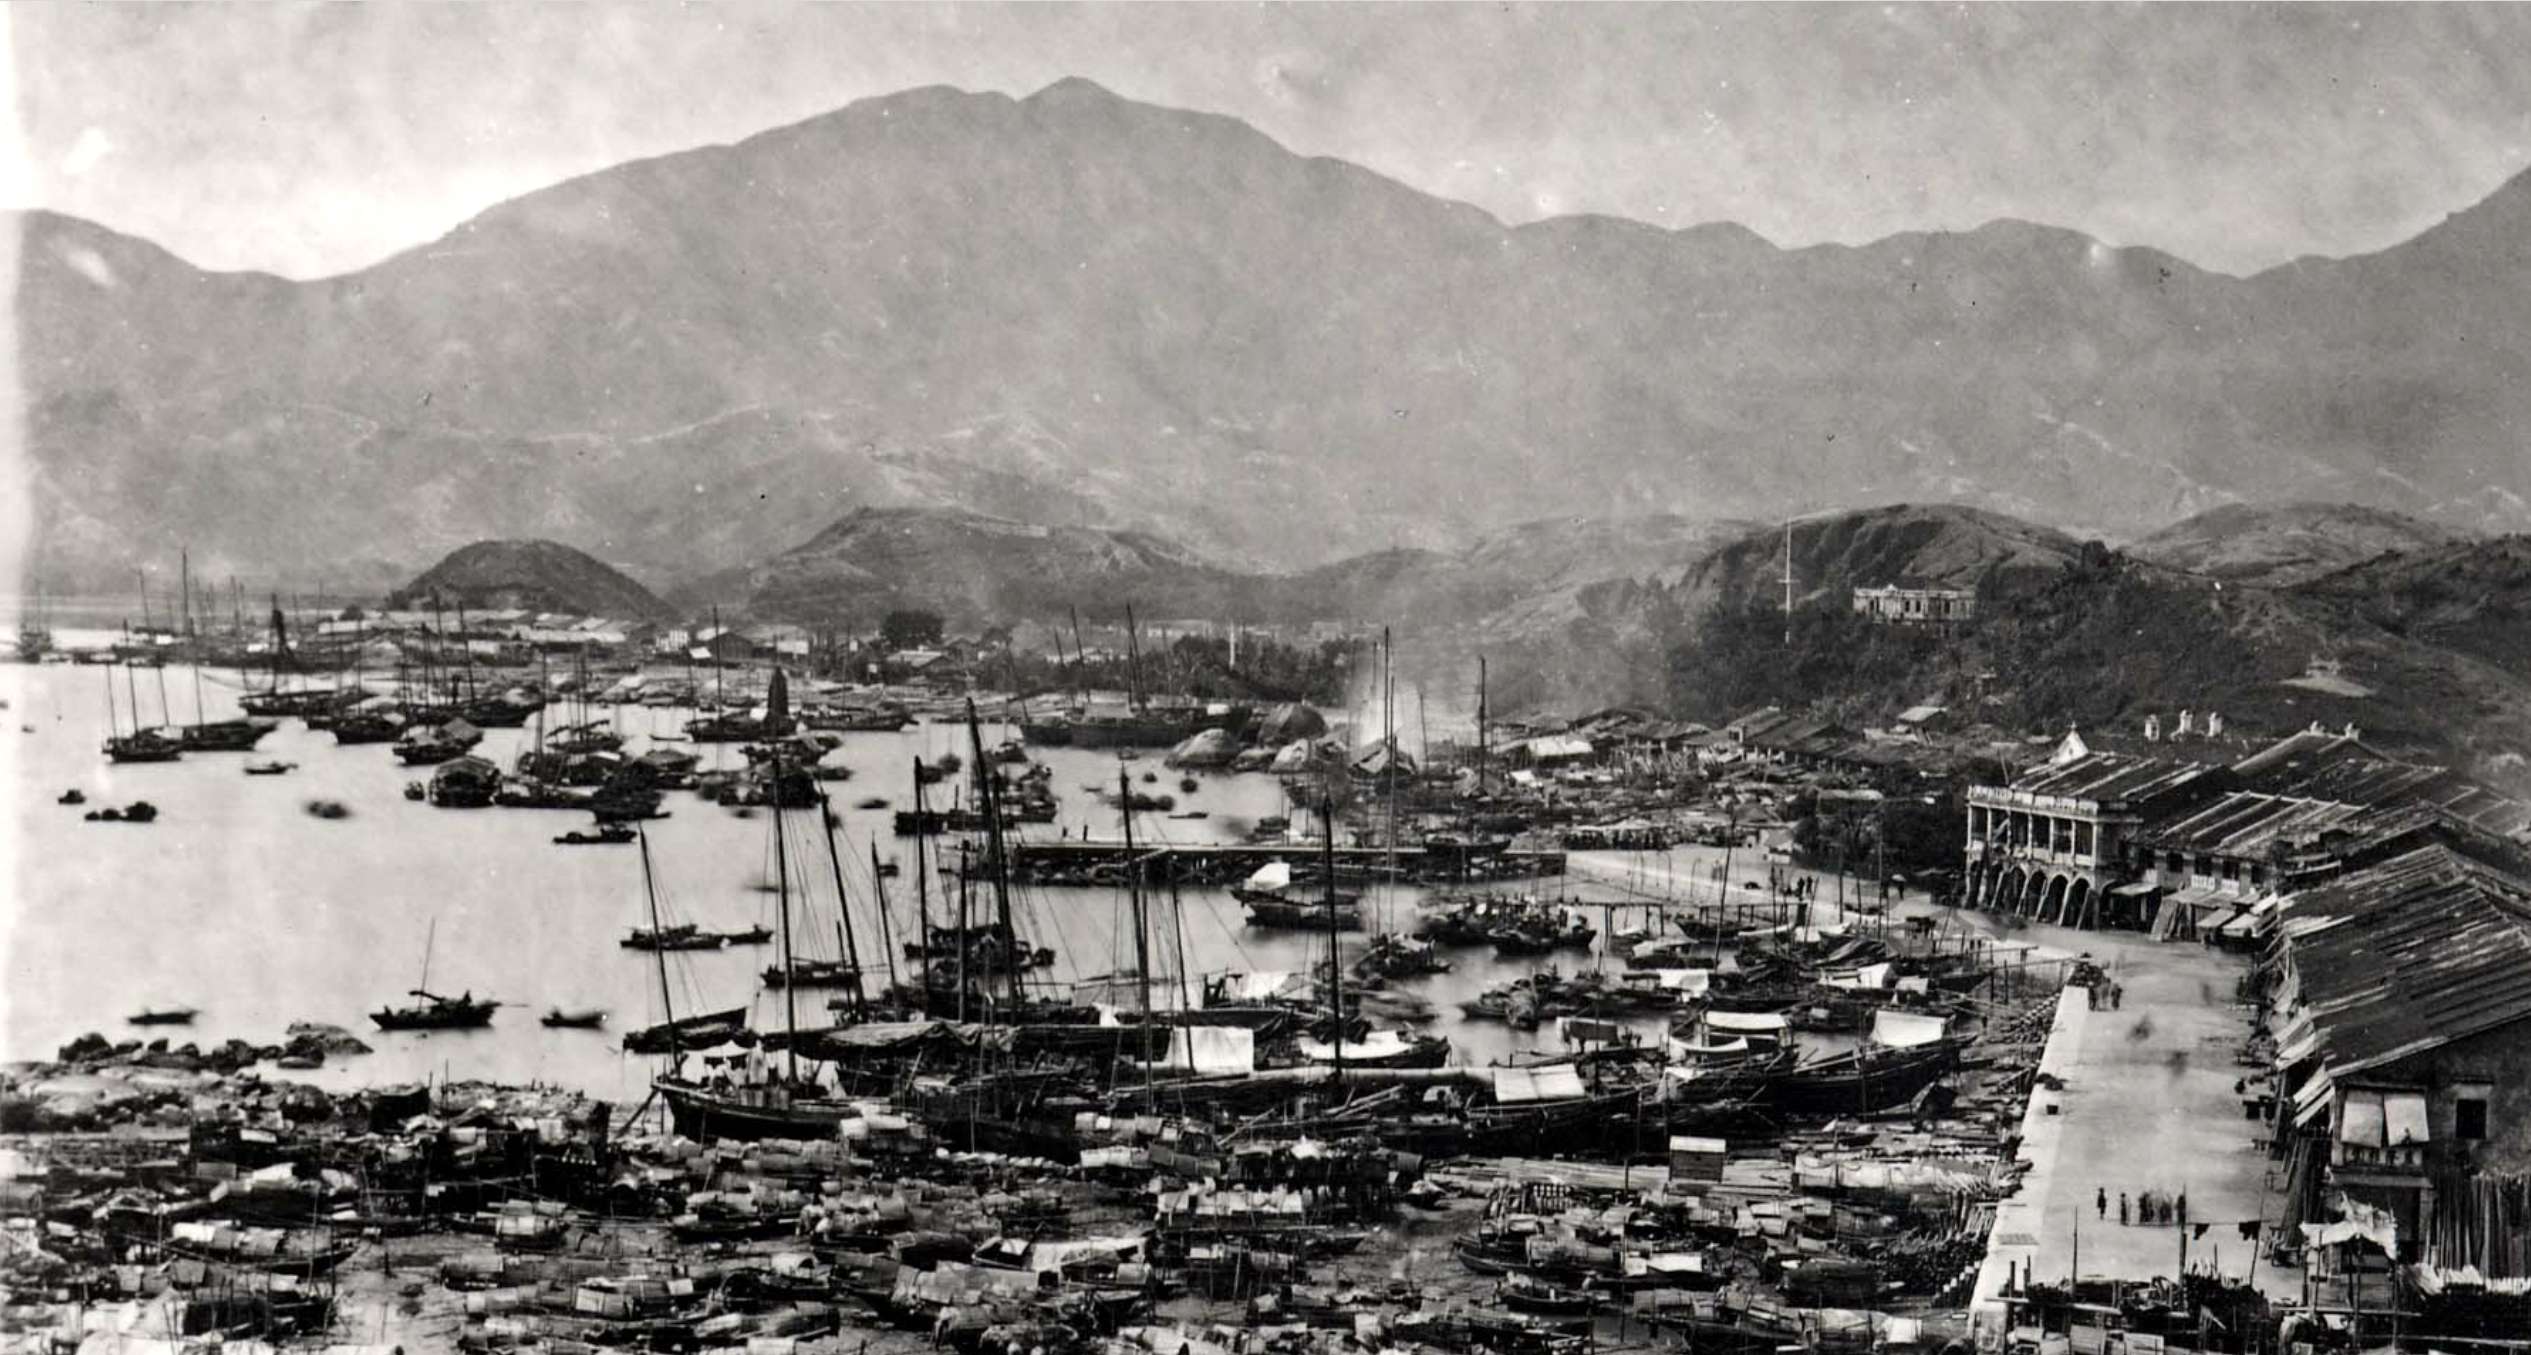 Chinese maritime activity on the Kowloon waterfront in 1900, a picture that is not reflected in Hong Kong’s street signs.